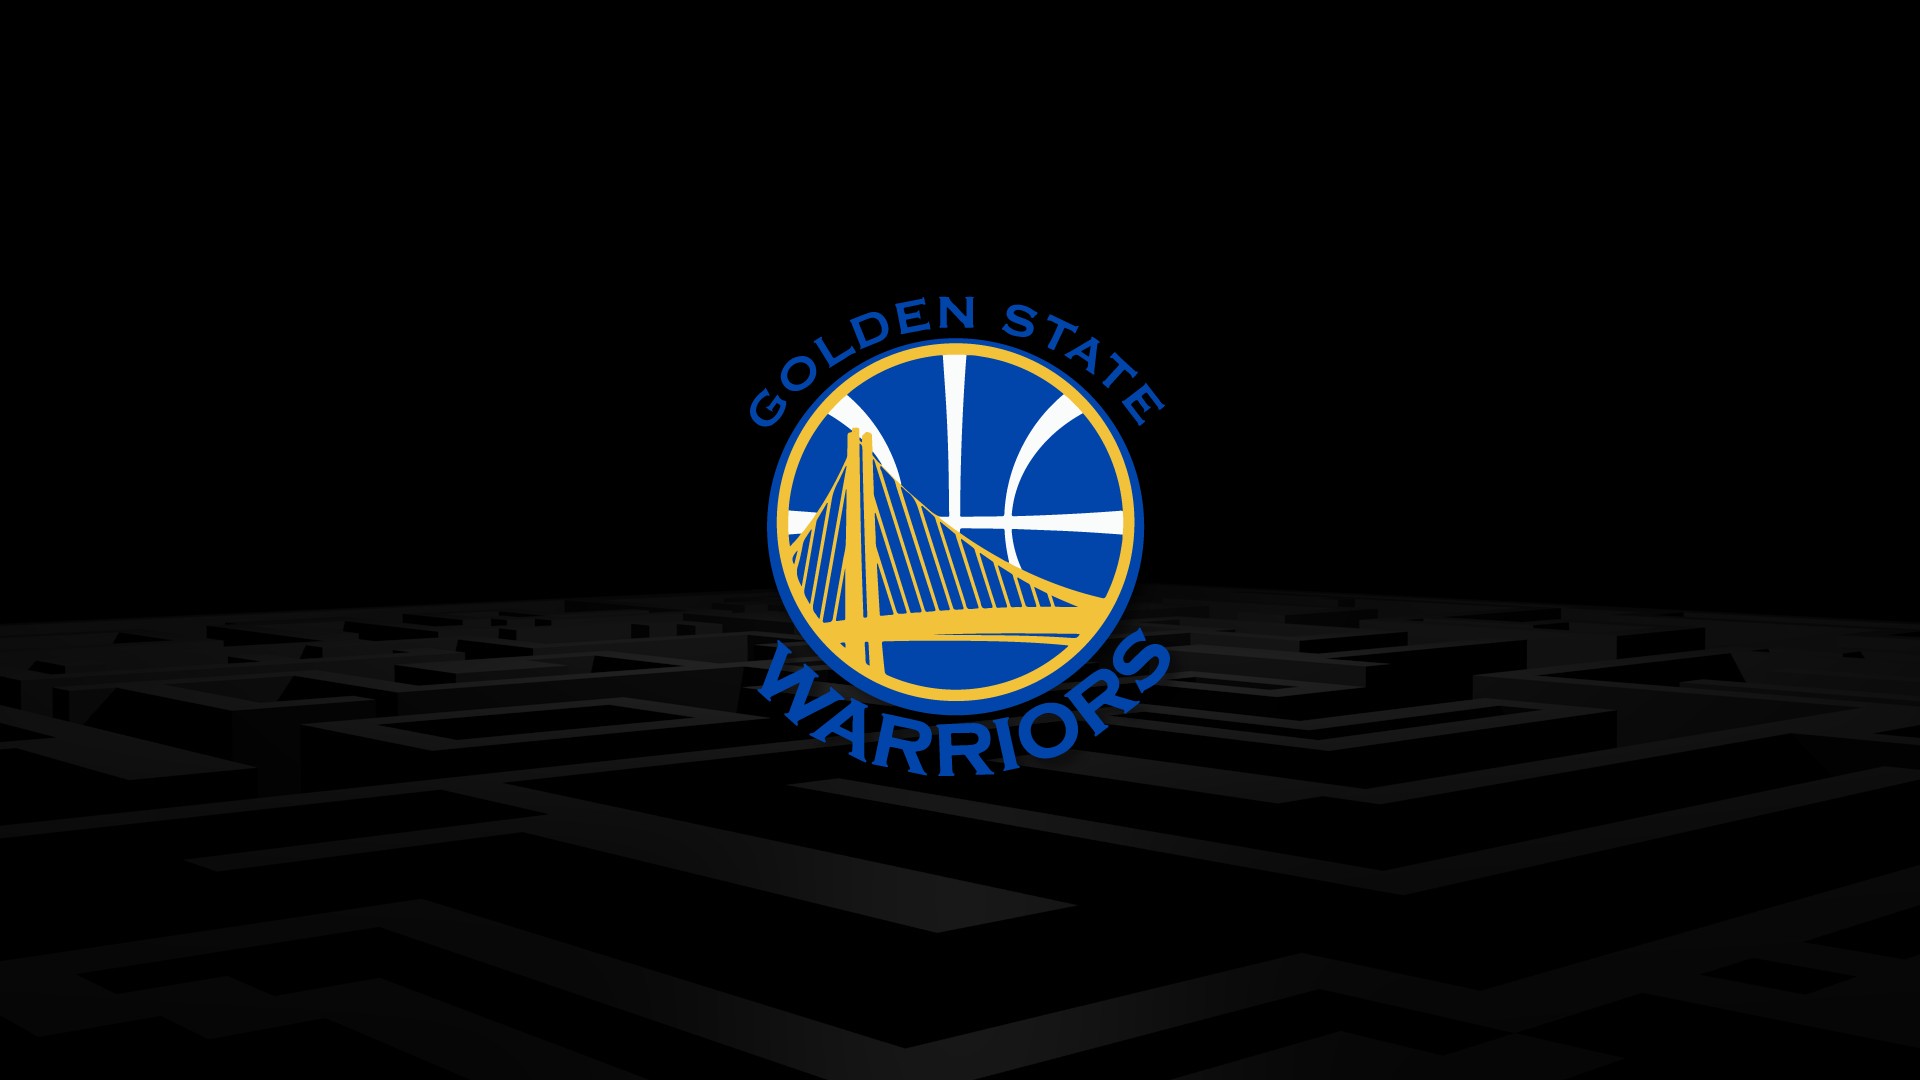 Golden State Warriors NBA Wallpaper with image dimensions 1920x1080 pixel. You can make this wallpaper for your Desktop Computer Backgrounds, Windows or Mac Screensavers, iPhone Lock screen, Tablet or Android and another Mobile Phone device